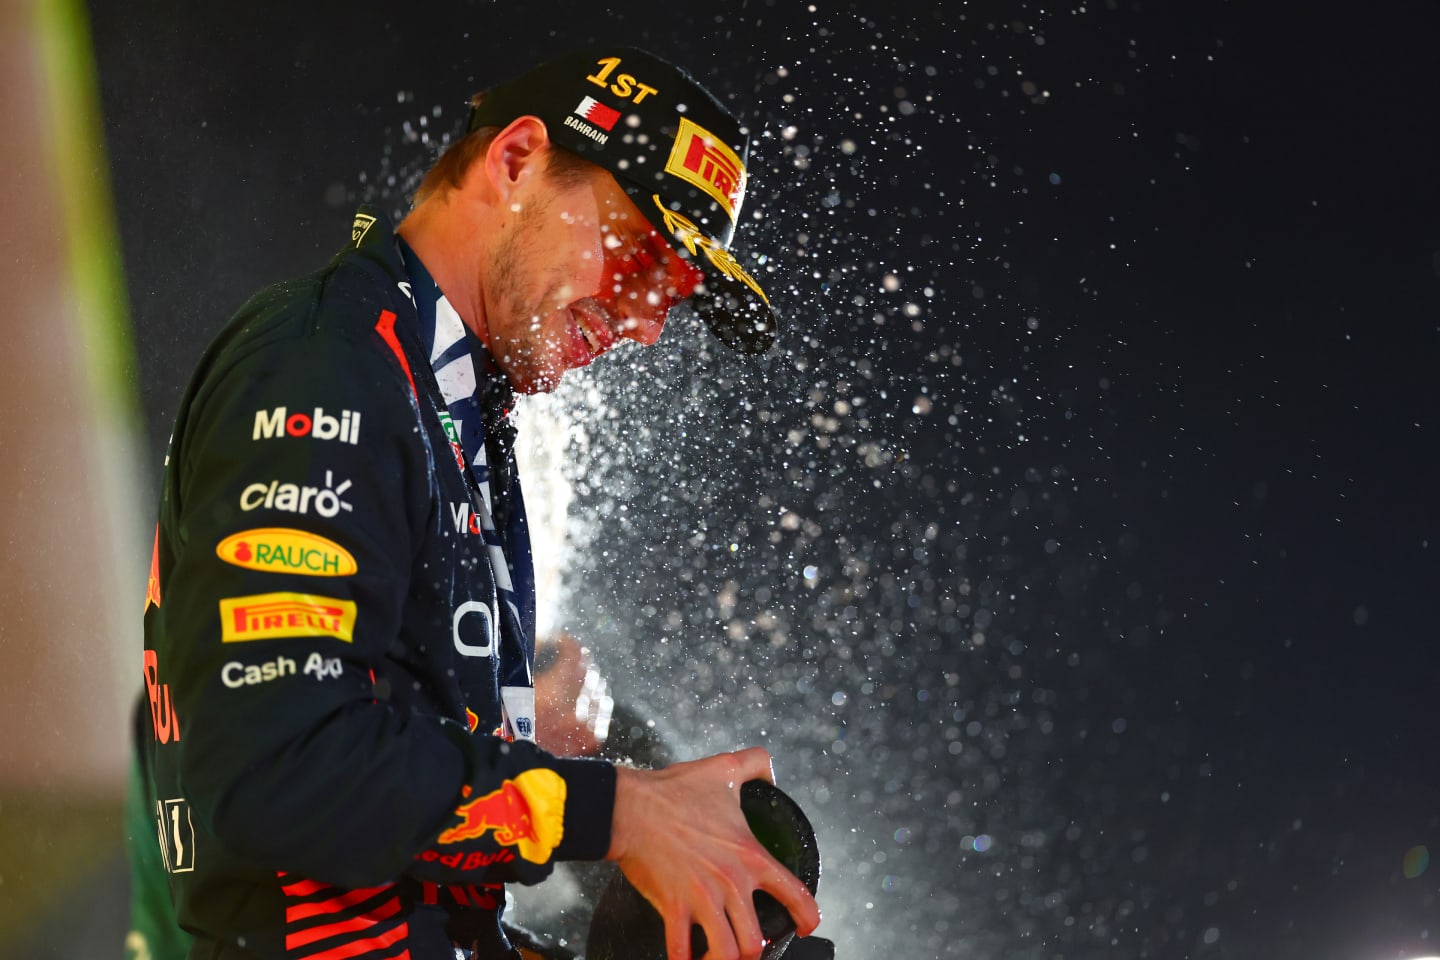 BAHRAIN, BAHRAIN - MARCH 05: Race winner Max Verstappen of the Netherlands and Oracle Red Bull Racing celebrates on the podium during the F1 Grand Prix of Bahrain at Bahrain International Circuit on March 05, 2023 in Bahrain, Bahrain. (Photo by Dan Istitene - Formula 1/Formula 1 via Getty Images)